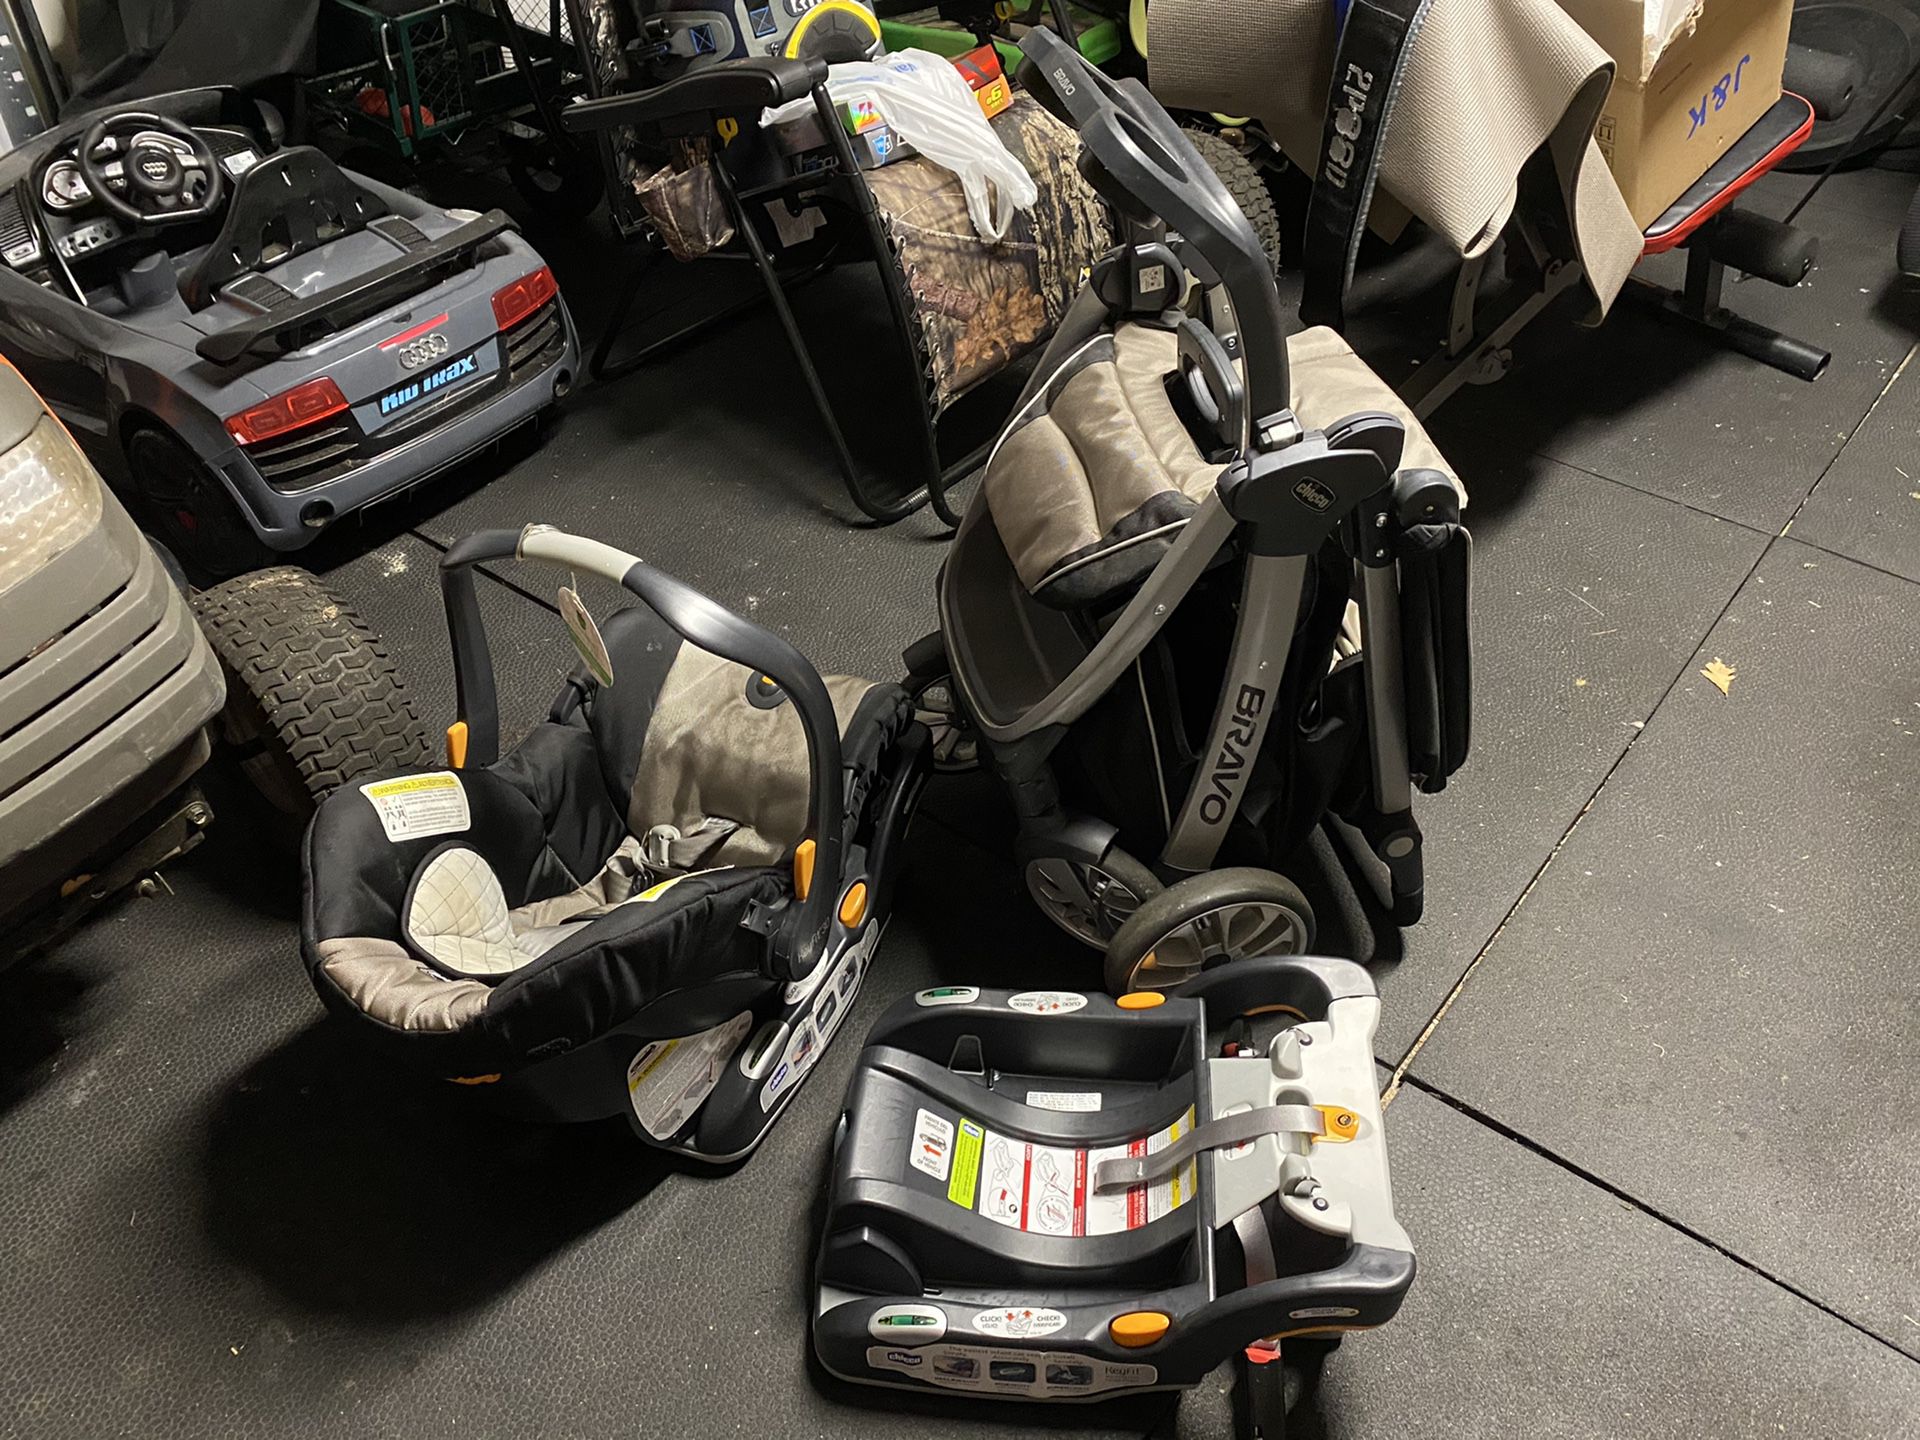 Chicco Bravo carrier, car seat, and stroller system